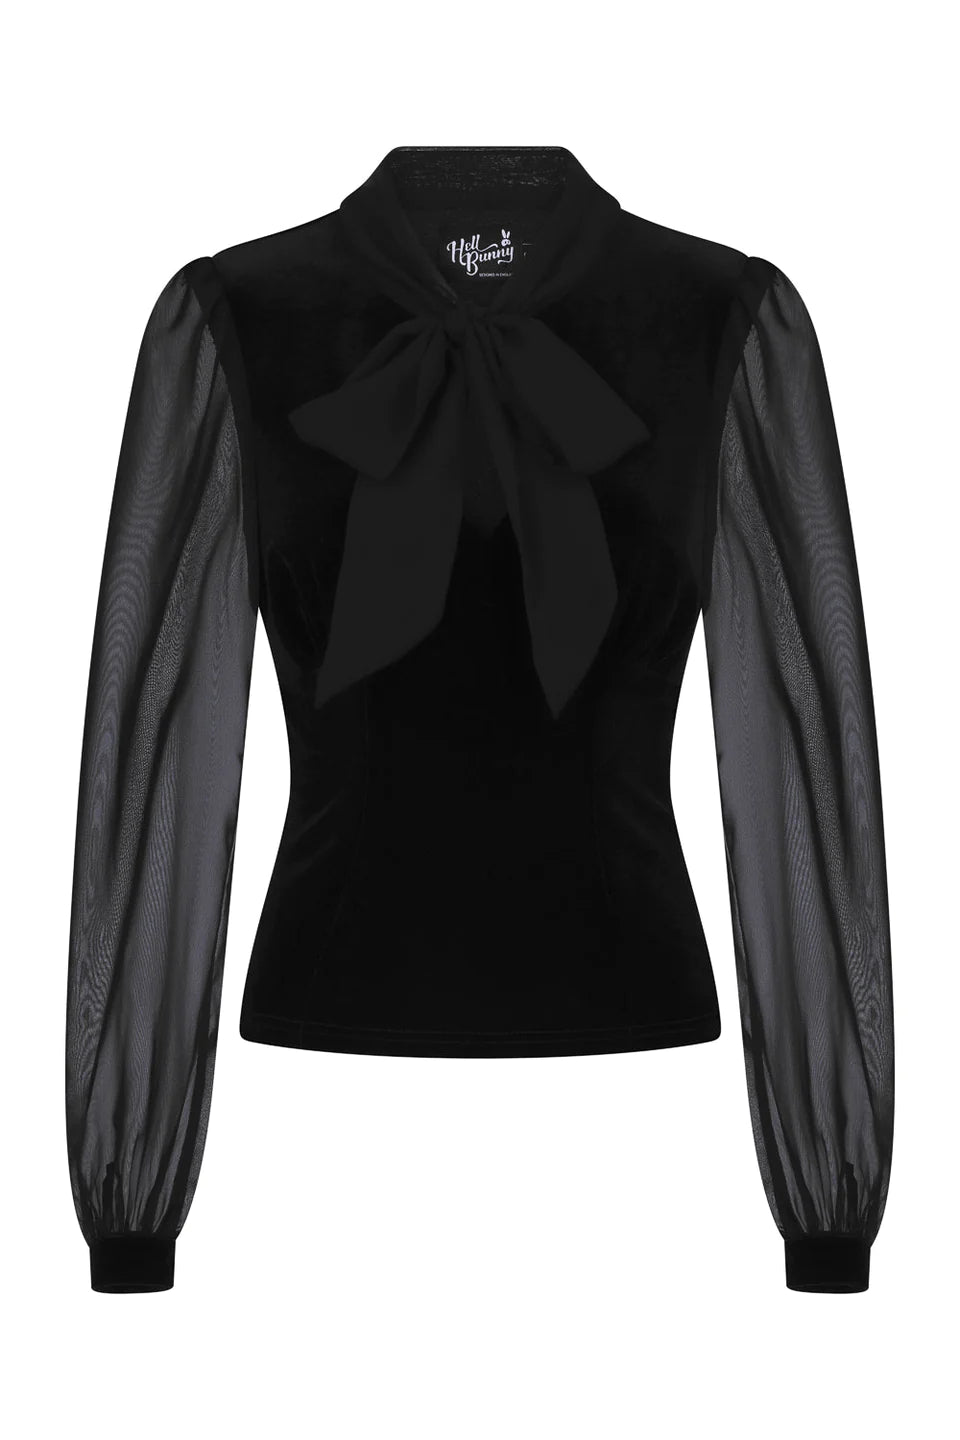 Gabriella Blouse by Hell Bunny